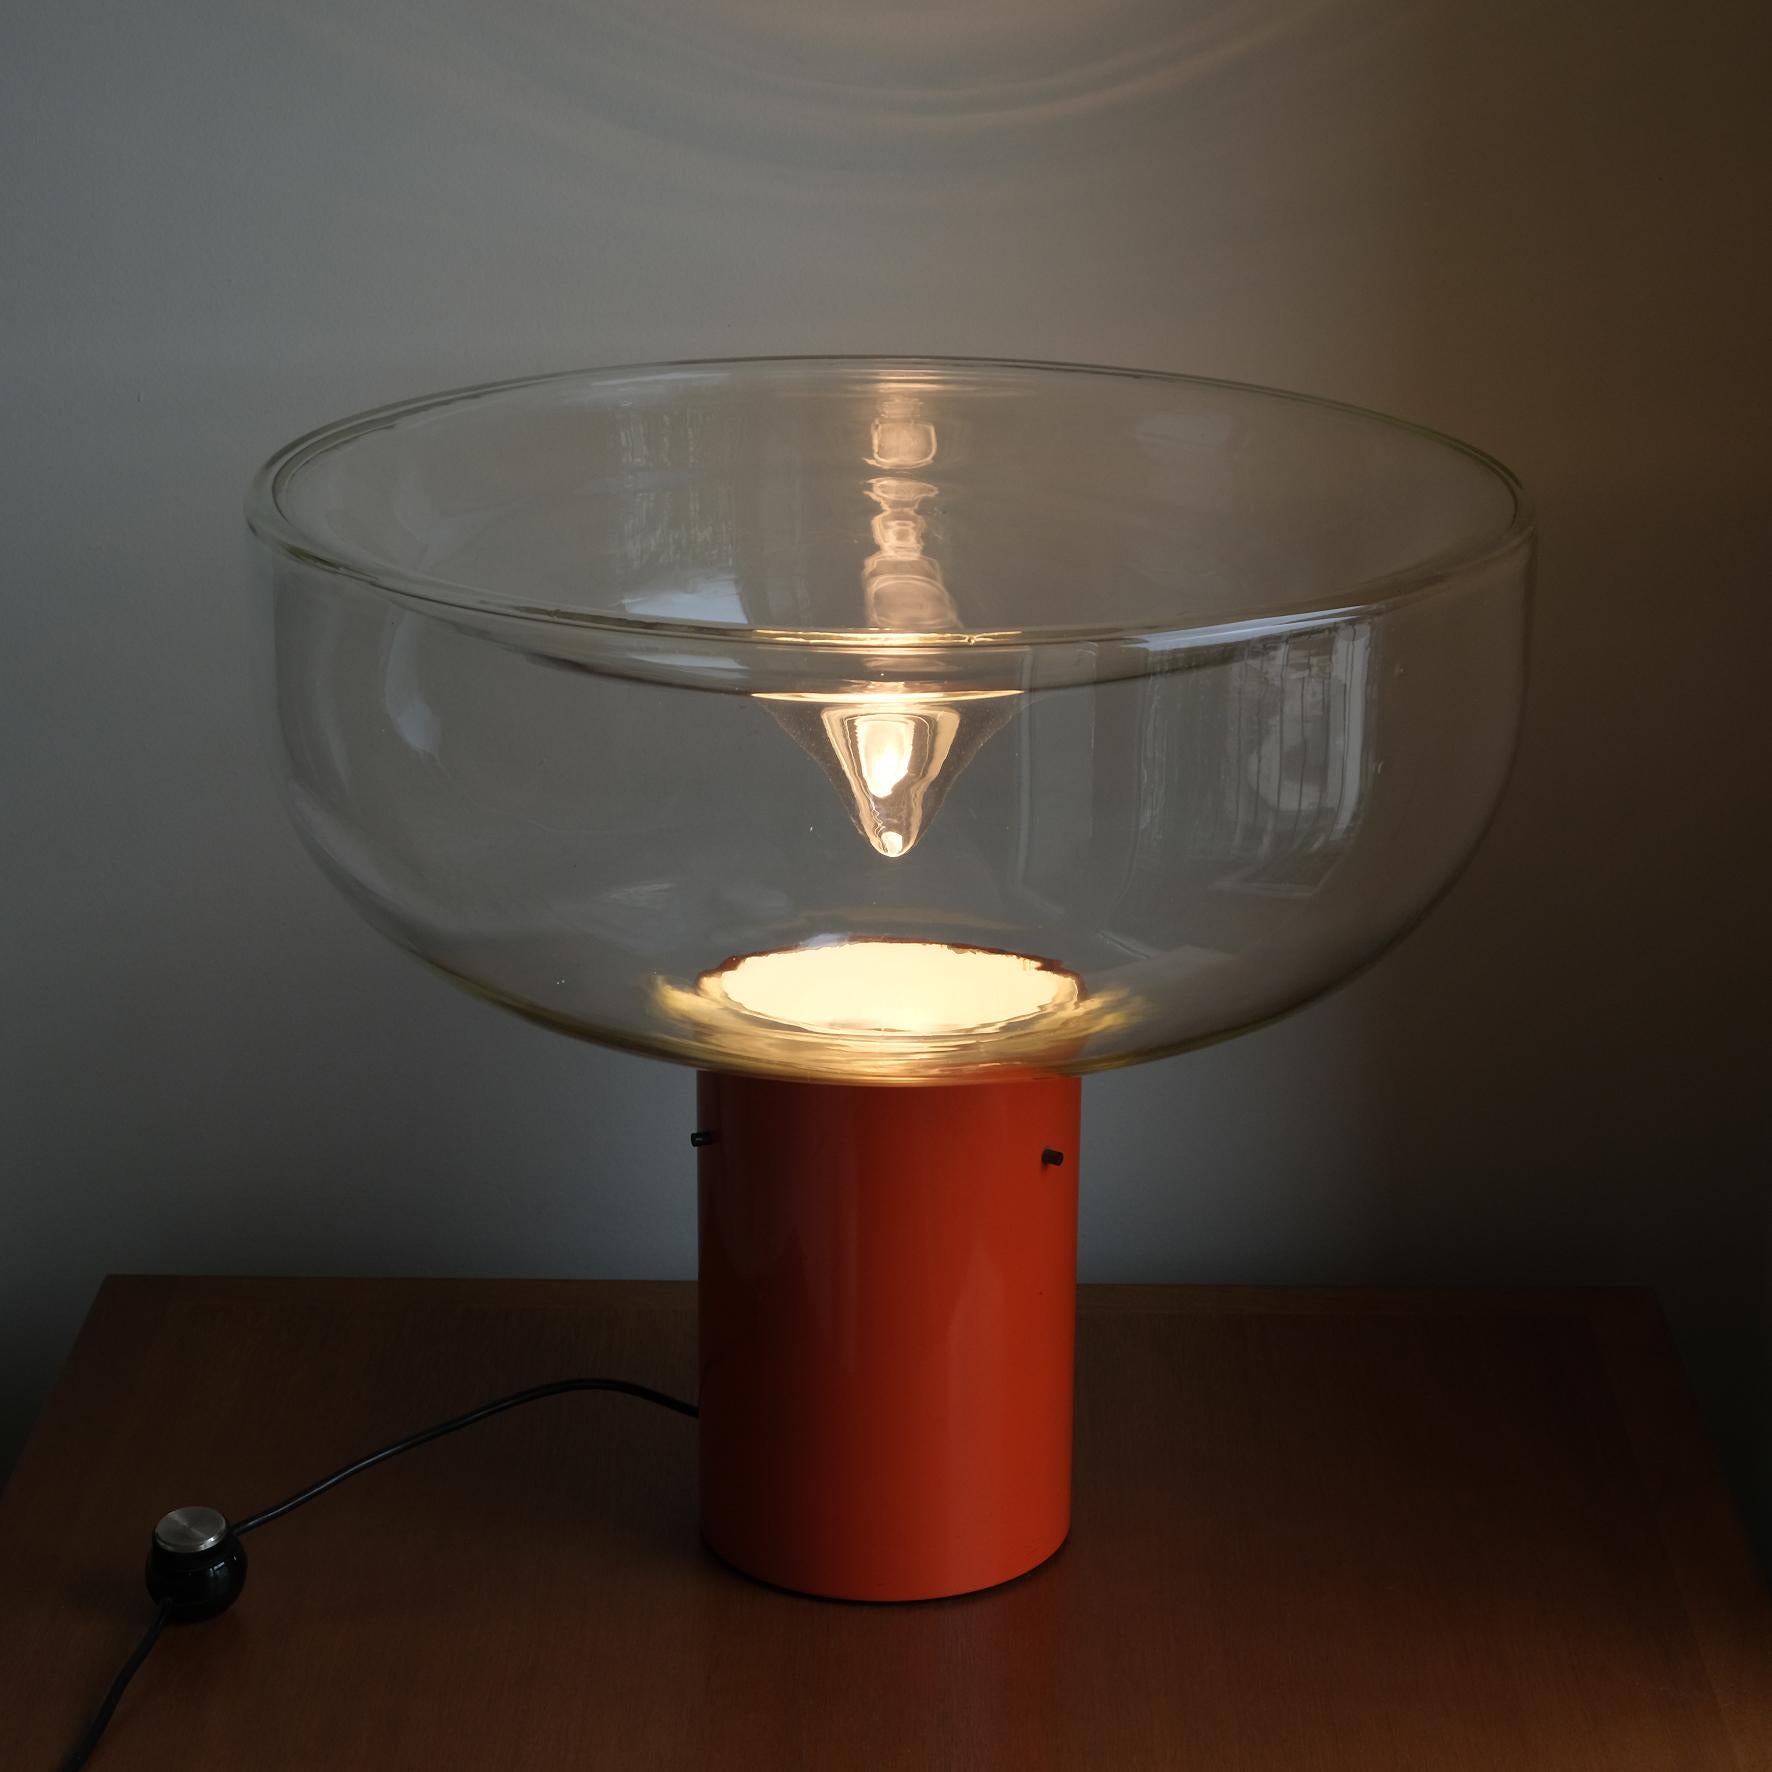 Renato Toso

Aella

A beautiful and original aluminum and blown glass table lamp, the orange lacquered cylinder stem supporting a transparent glass round shade.
Produced by Leucos, Italy.
circa 1968.

Literature
Domus n°463, June